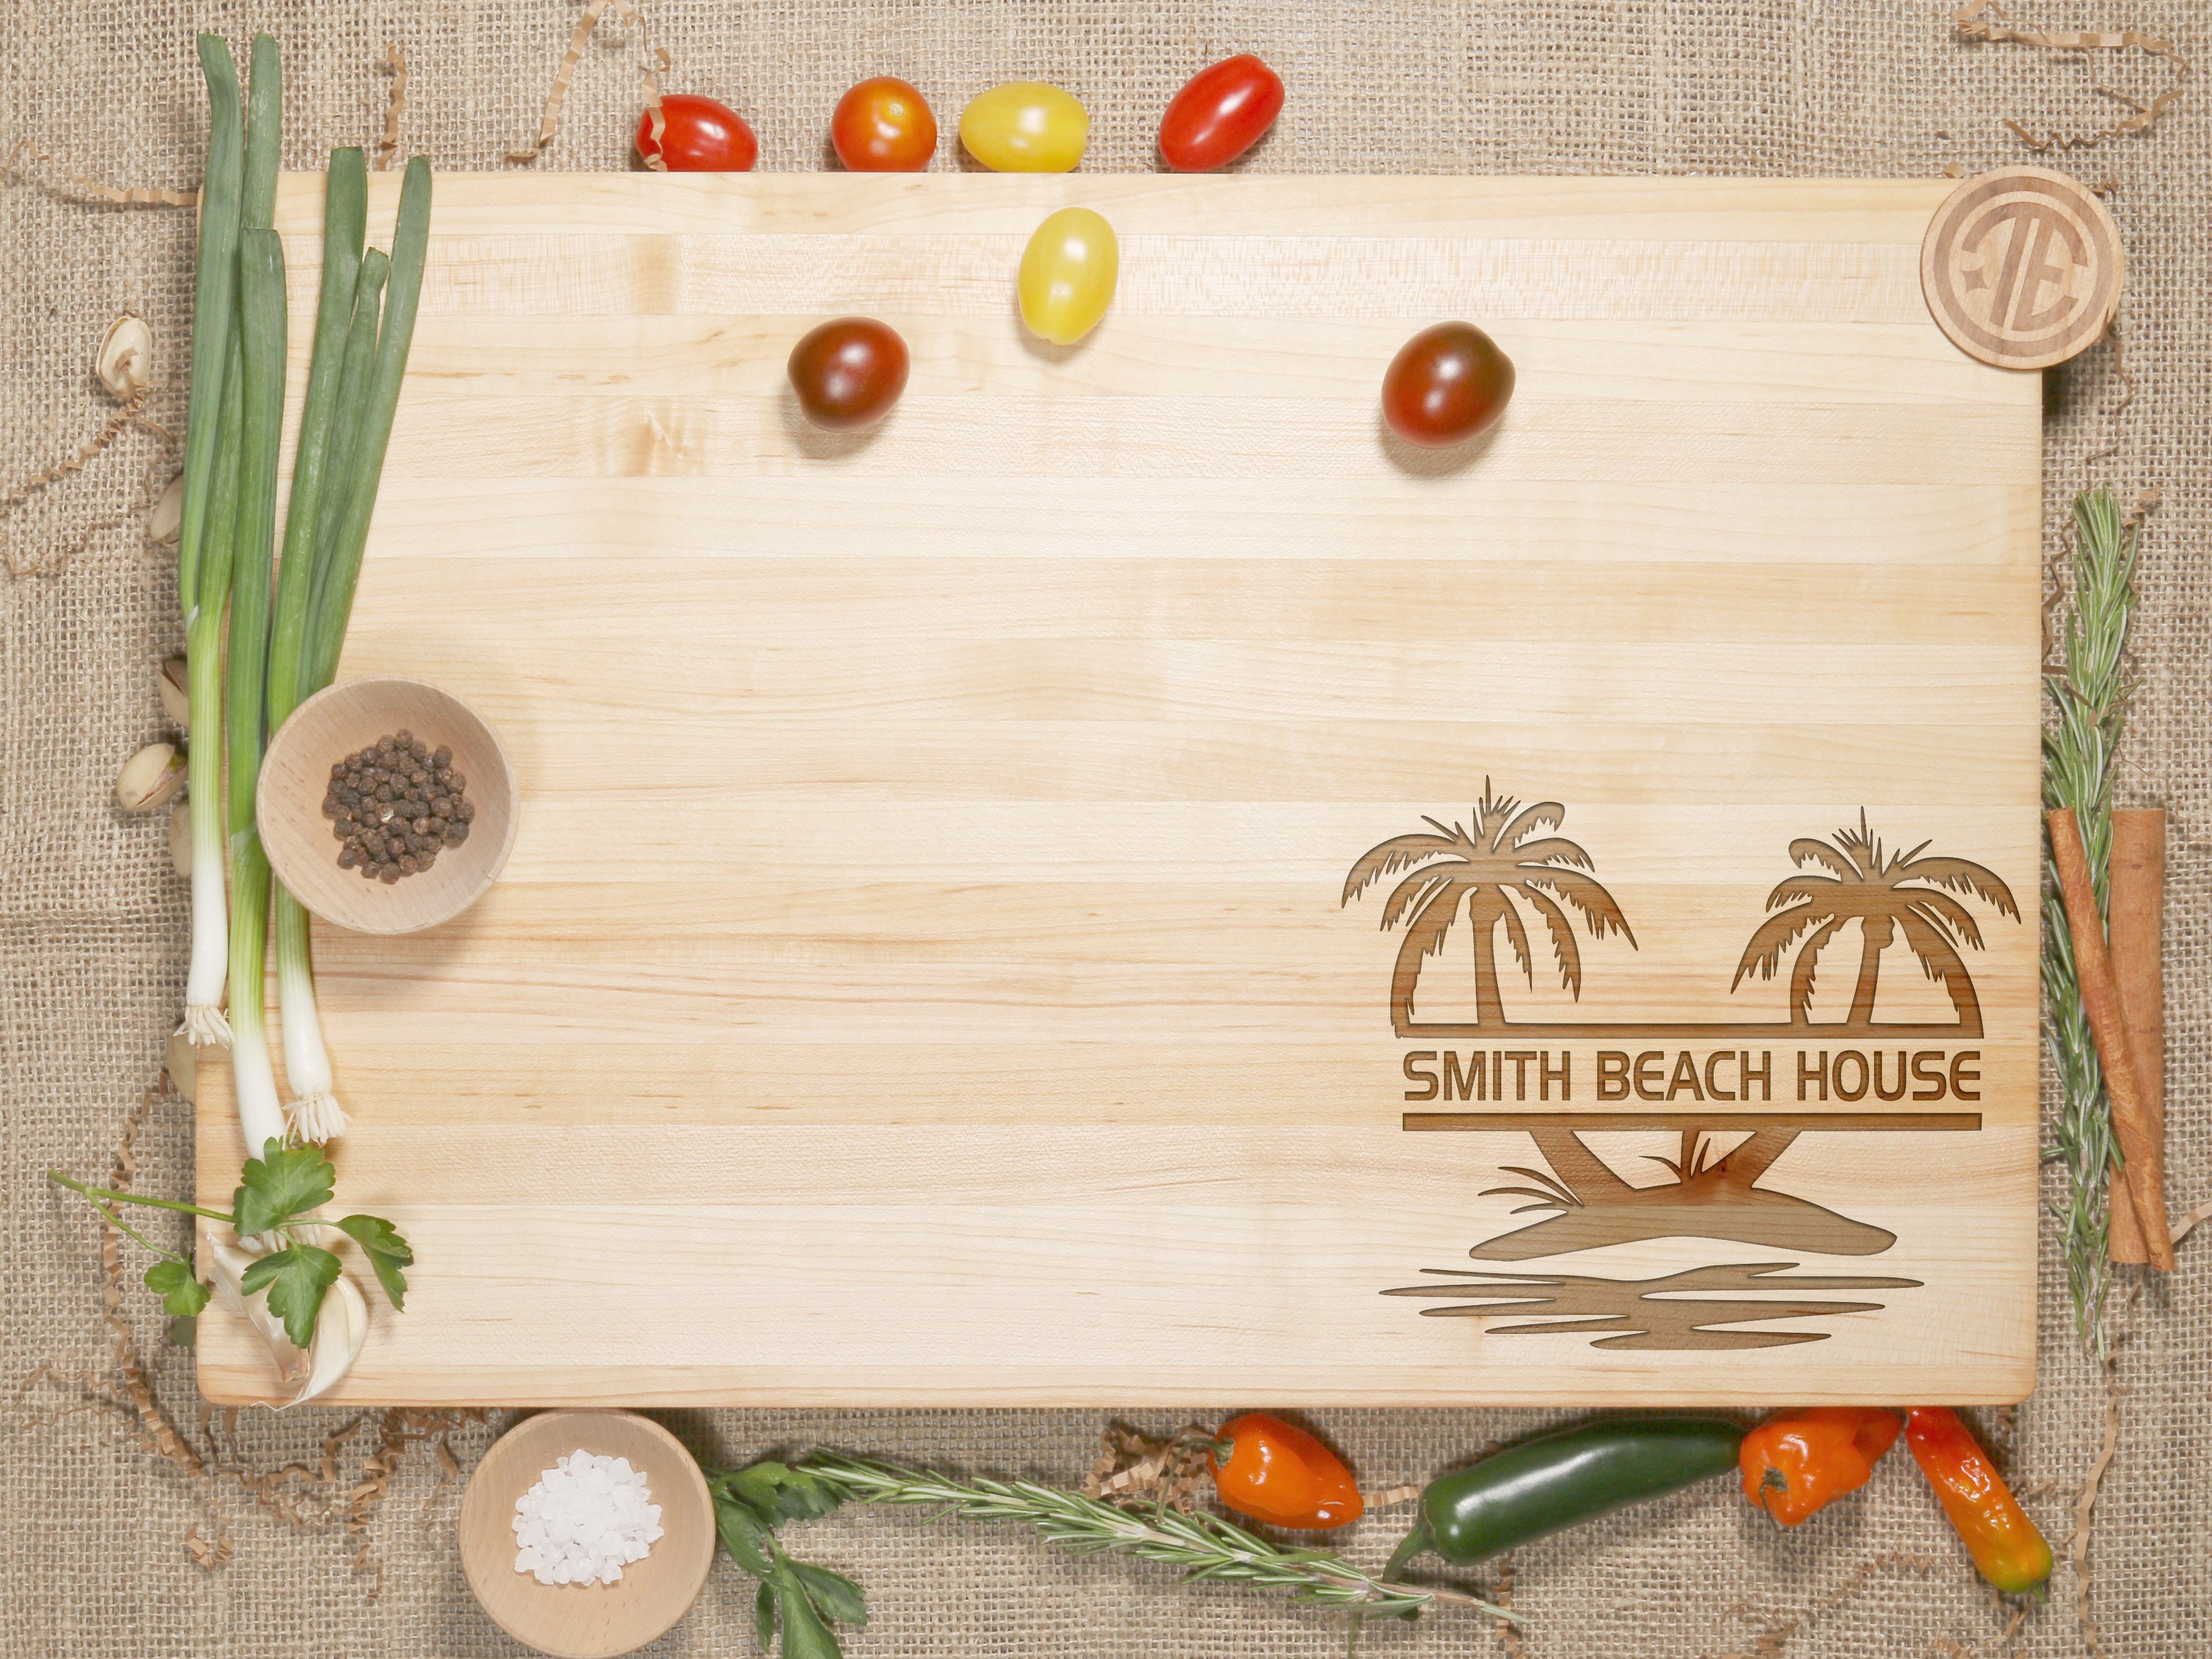 Leaves Etched Wood Cutting Board